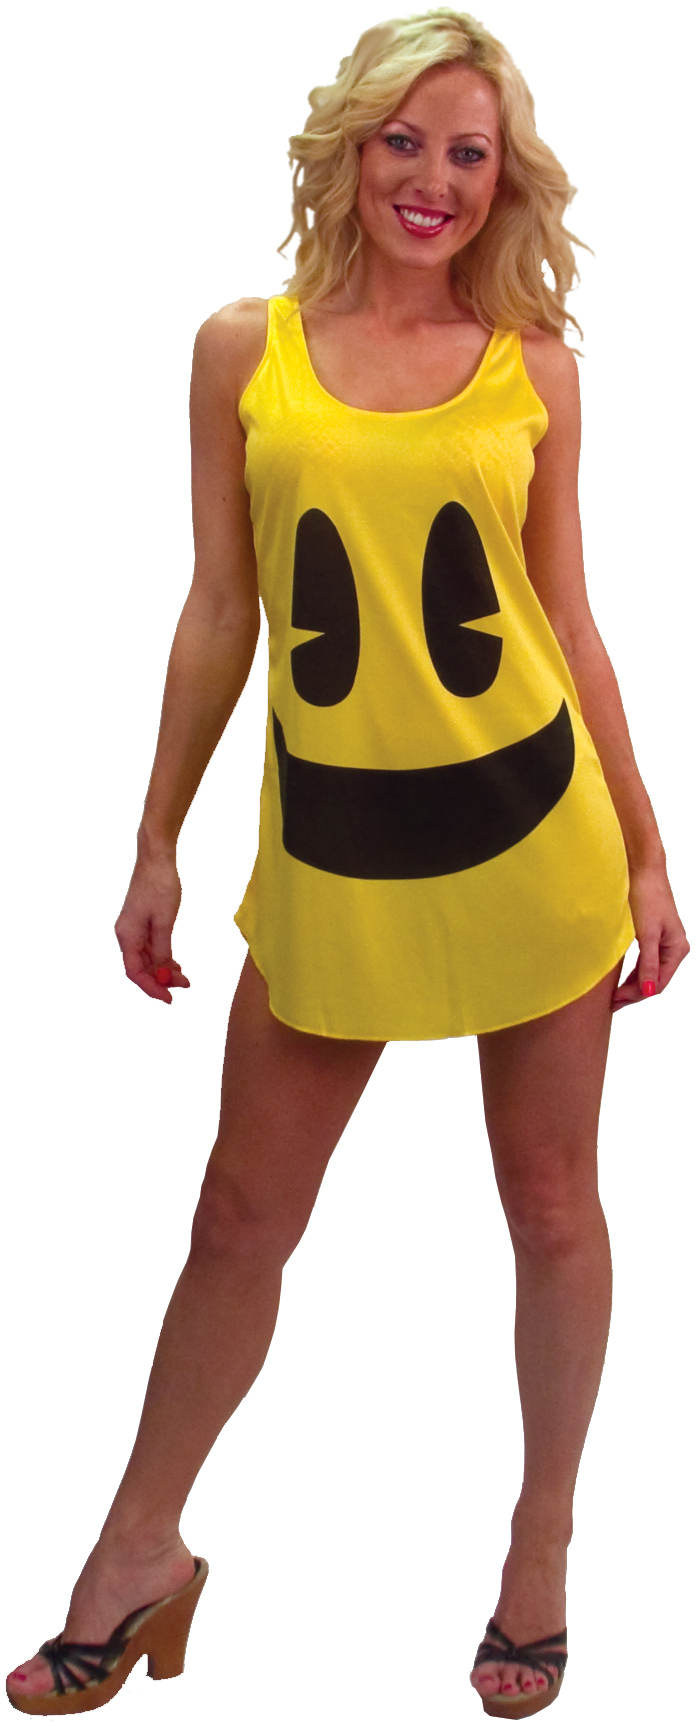 InCogneato Women's Pac-Man Deluxe Tank Dress Adult Costume - Yellow - Standard (One Size)